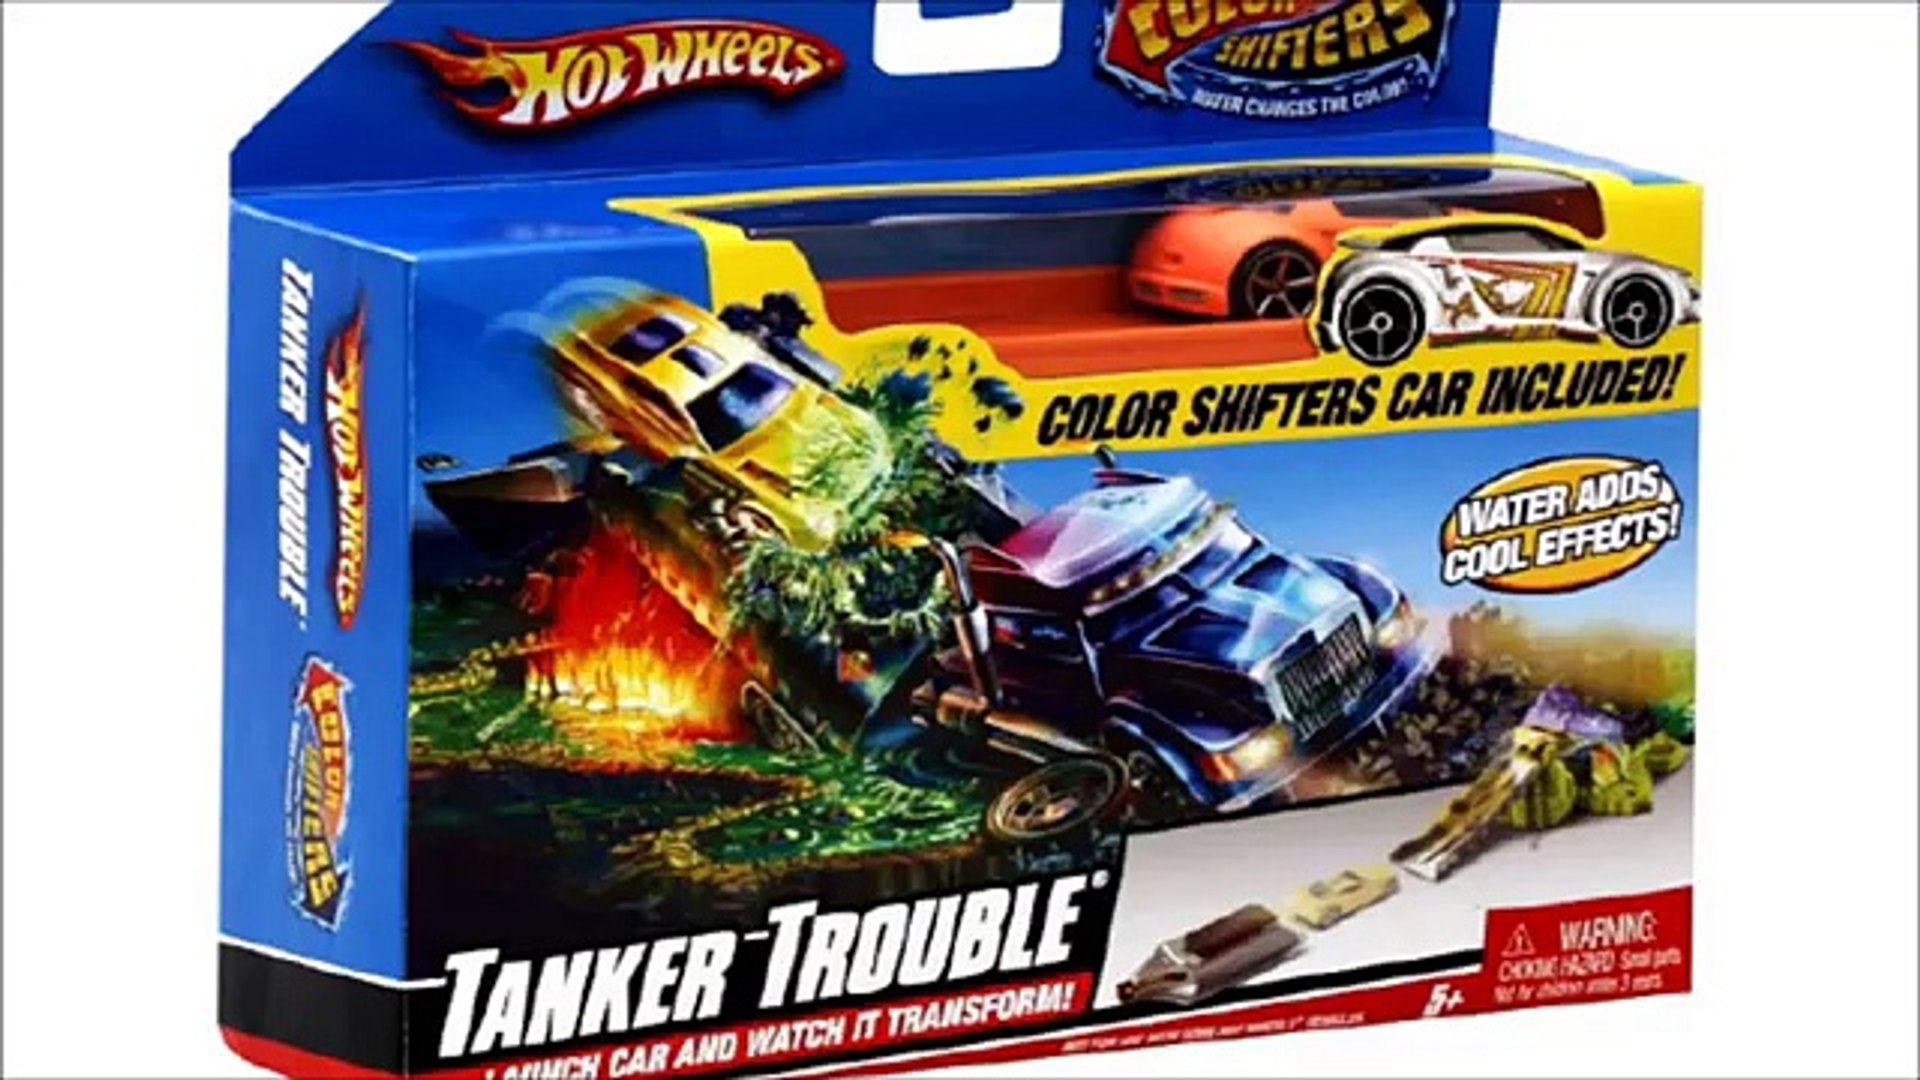 Hot Wheels Color Shifters Tanker Trouble Color Changing Cars Playset - video  Dailymotion